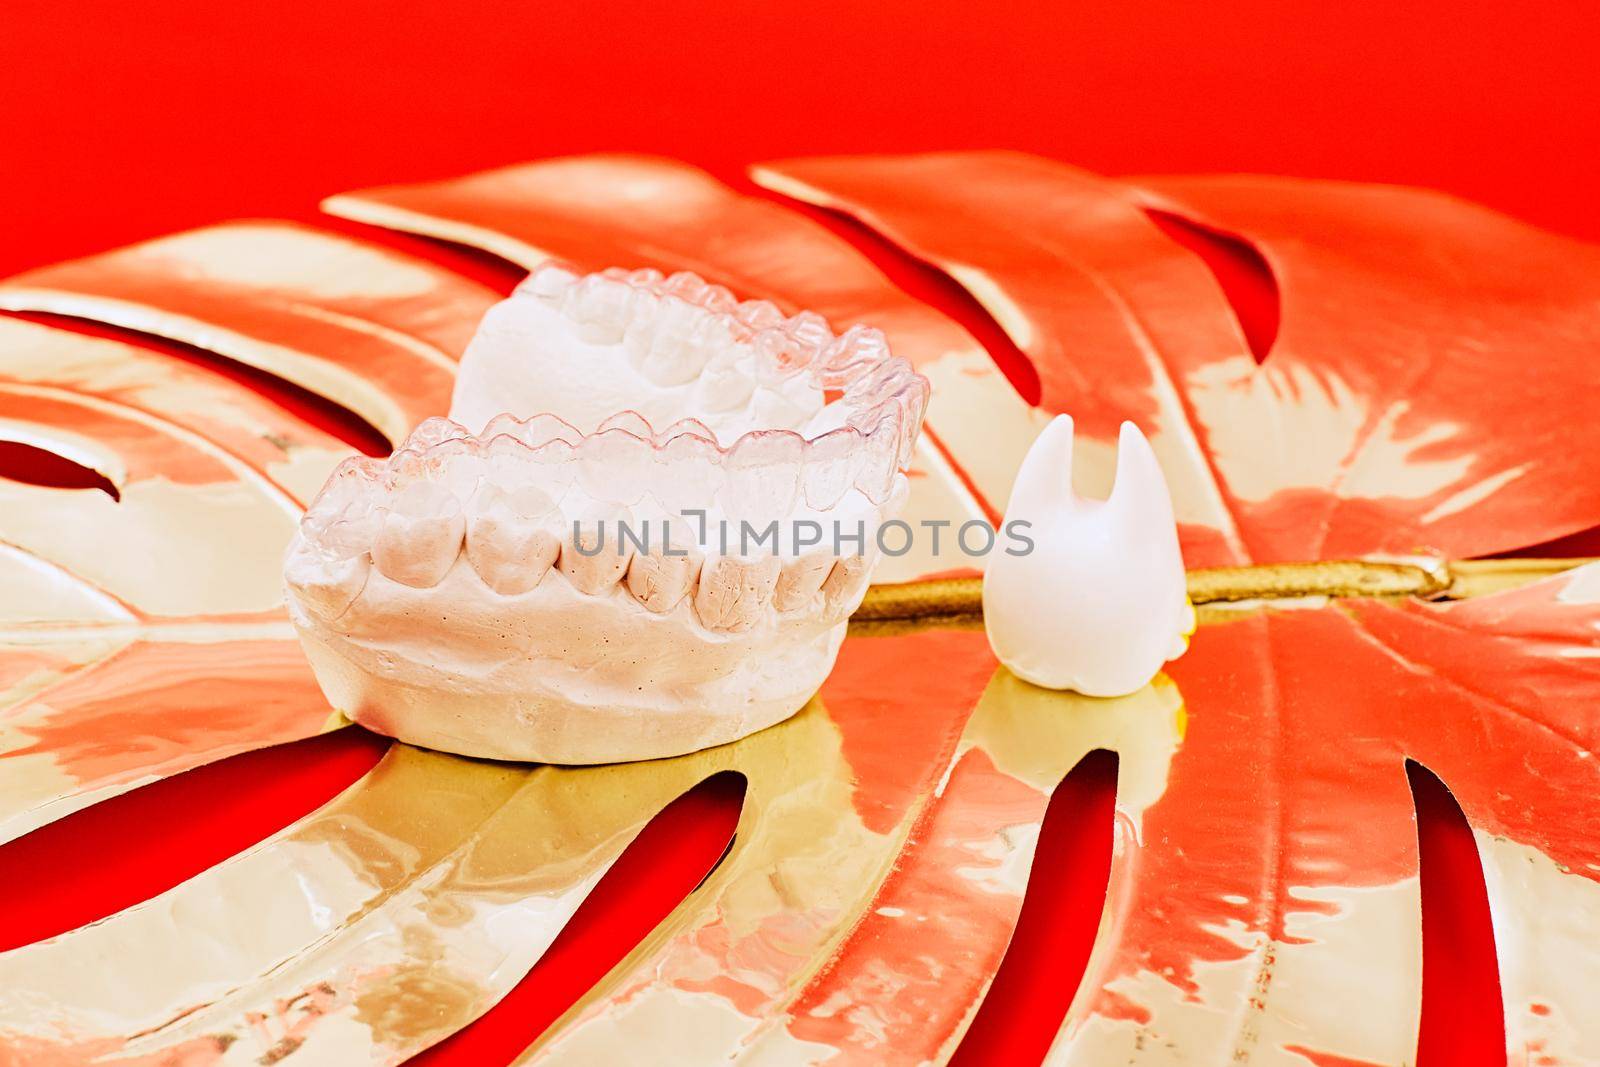 Heart of gold on a red background in invisible dental aligners or braces aplicable for an orthodontic dental treatment